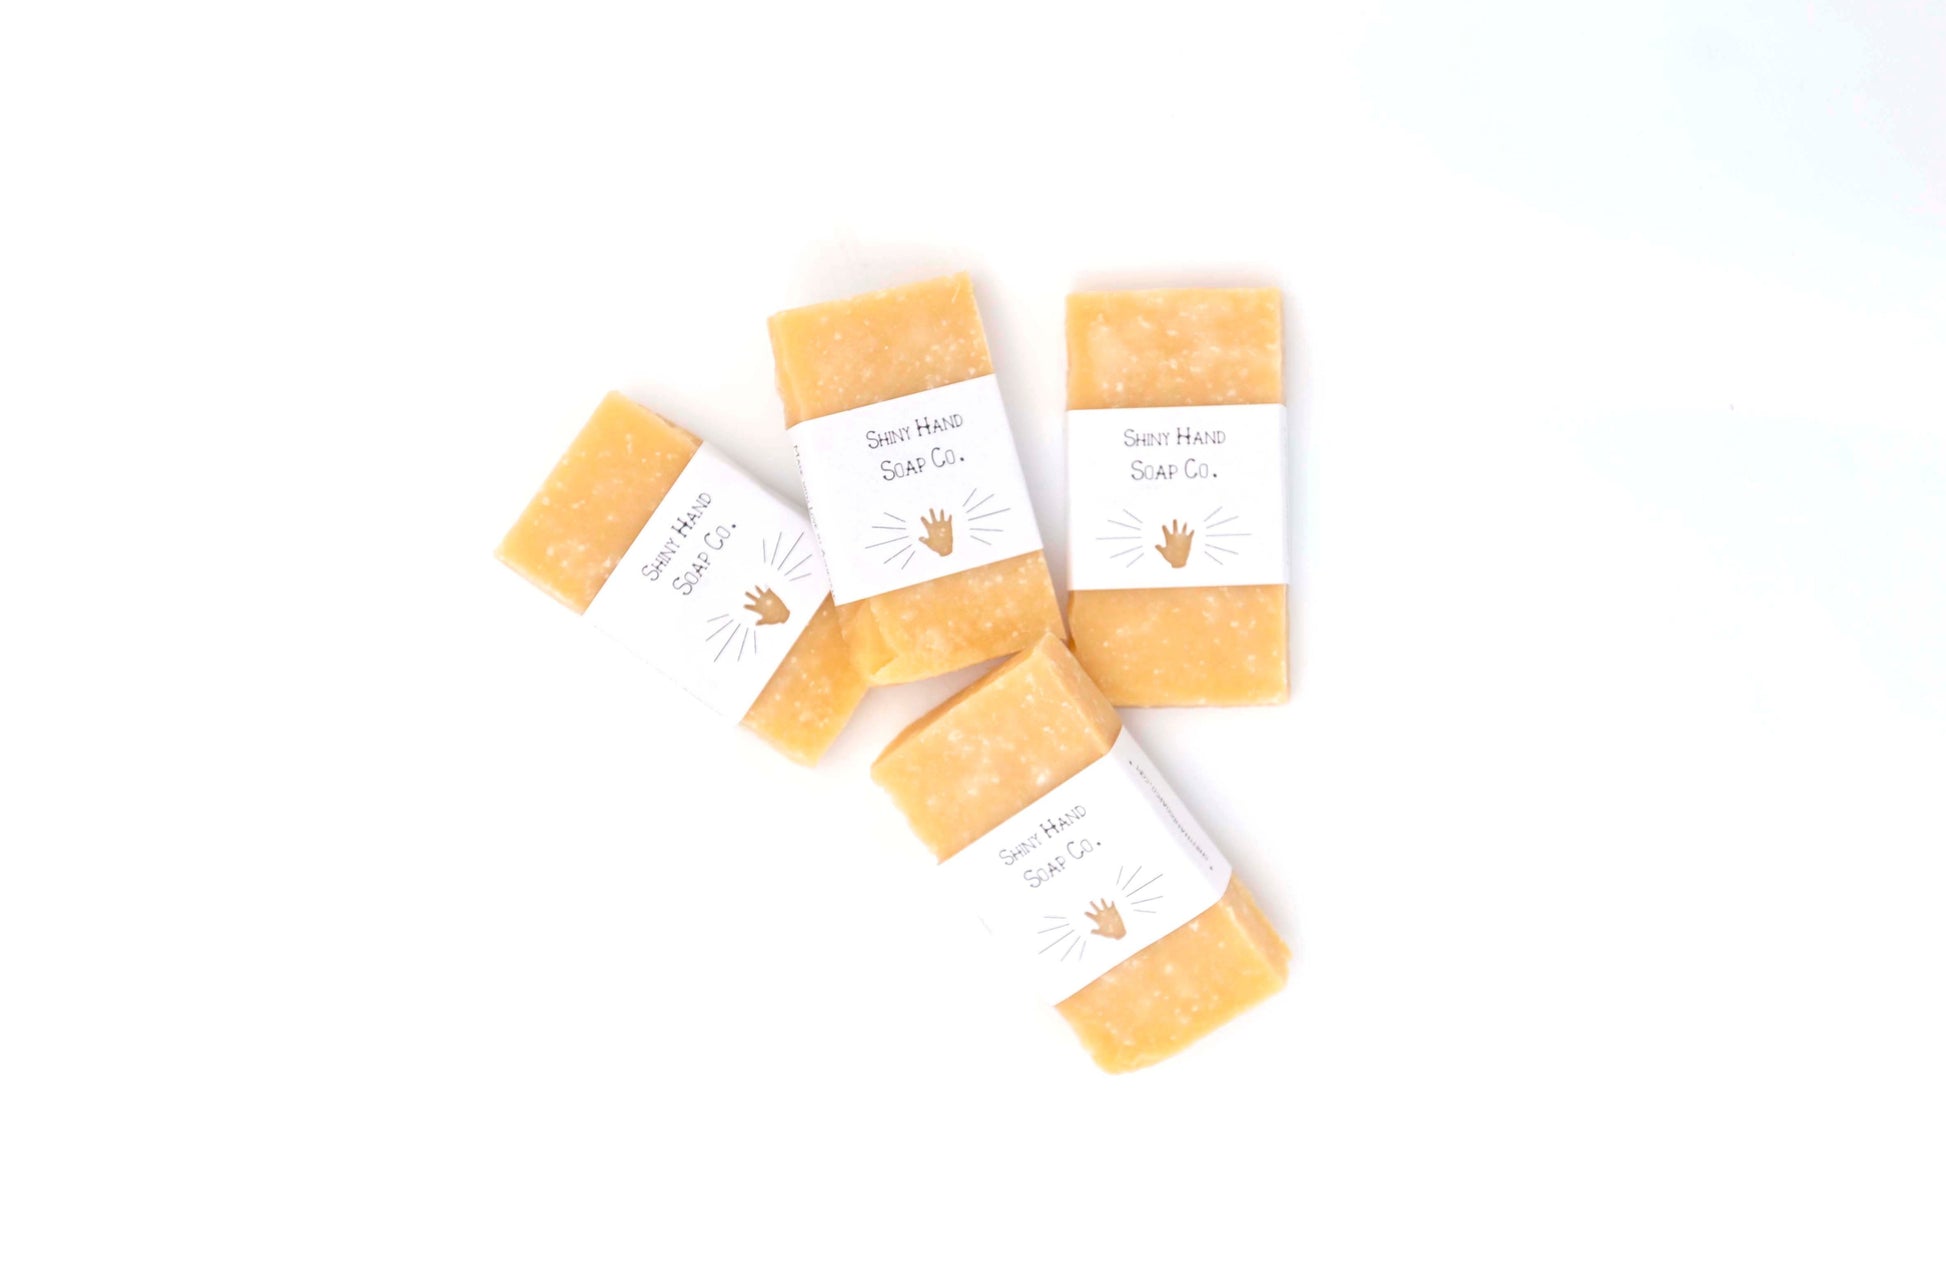 Four rich yellow Lemon Sea Salt Mini Sample Soaps flecked with white salt crystals sit on a clean white background in white recyled paper wrappers with a tiny hand cutout.